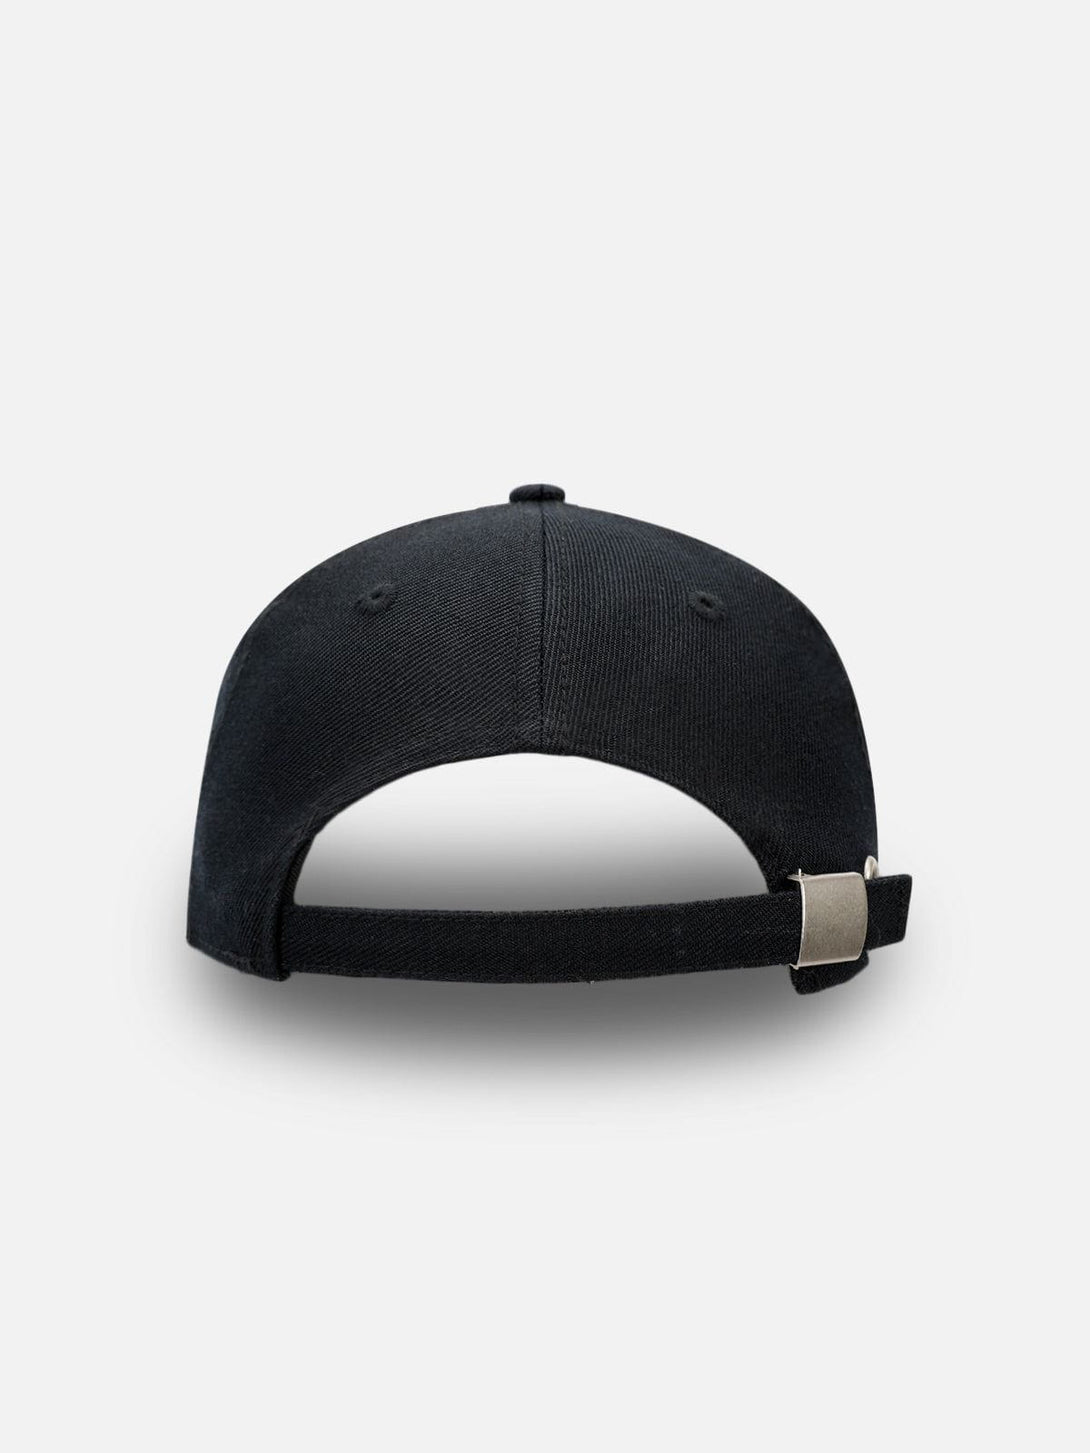 Levefly - Letter Embroidery Cap - Streetwear Fashion - levefly.com